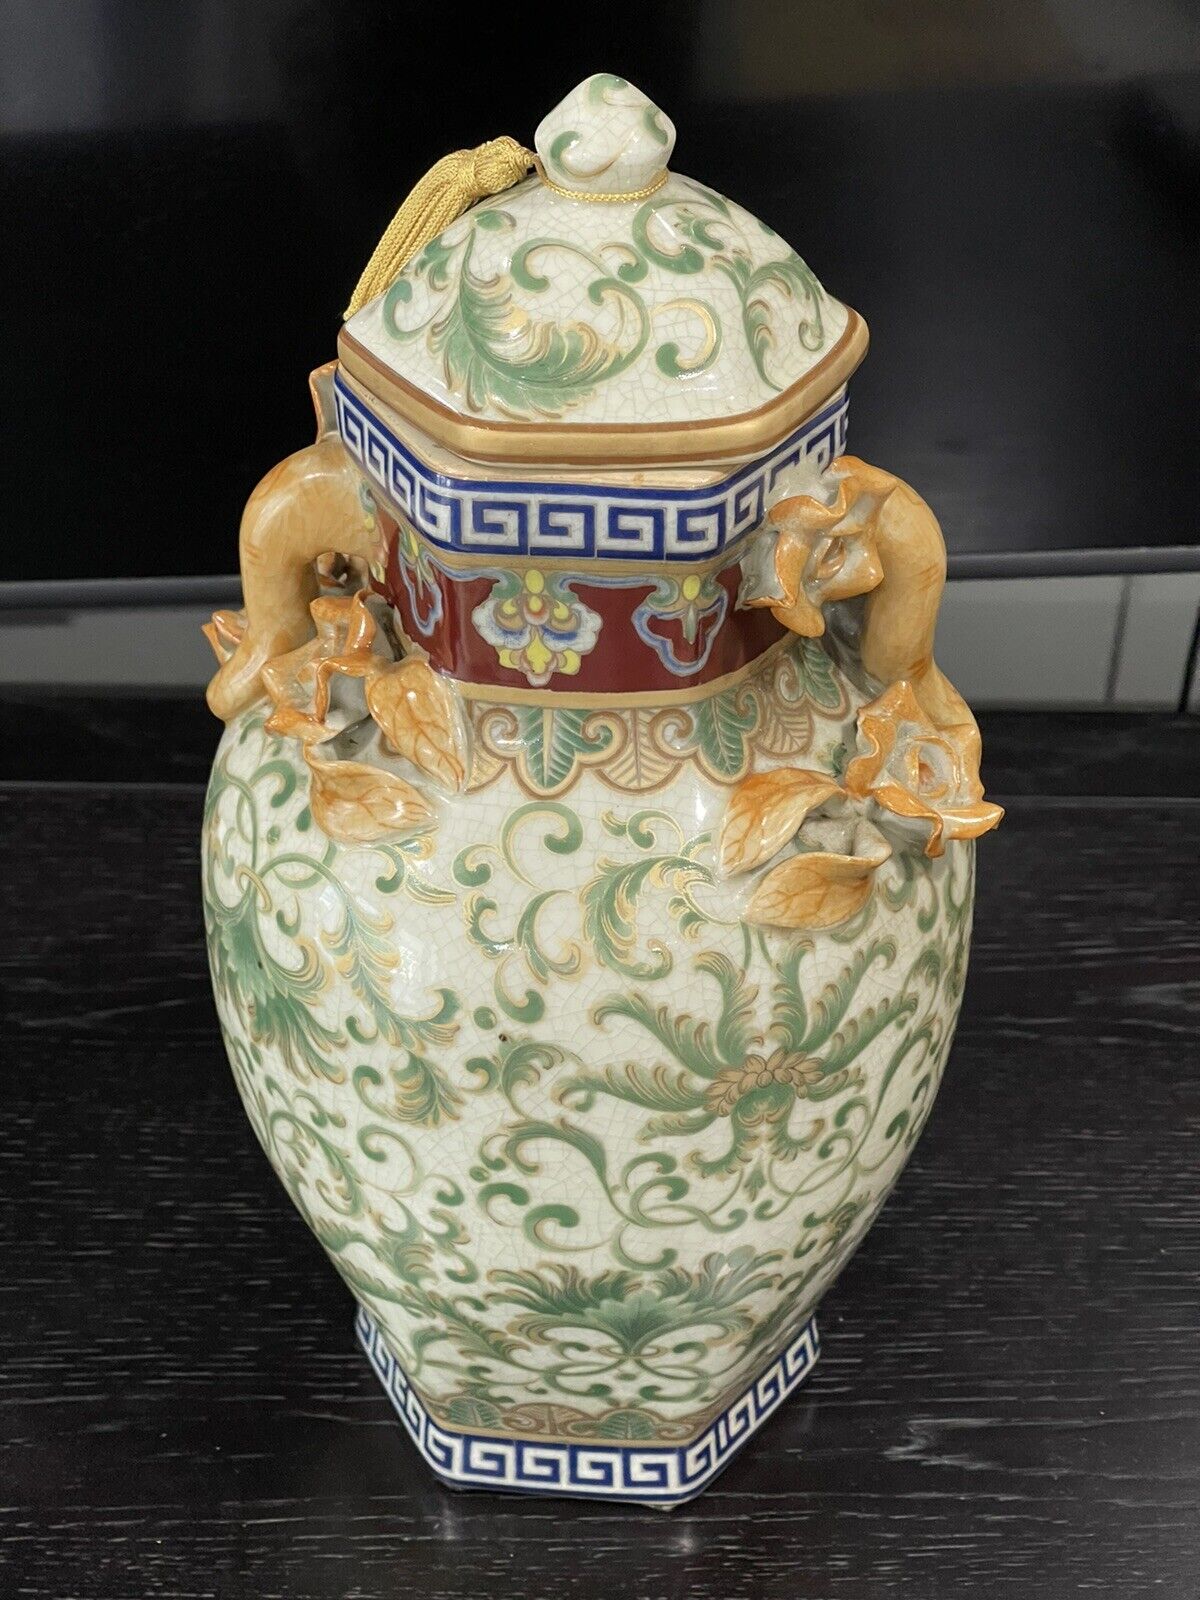 Chinese Crackle Glaze Urn Vase With Lid Approx. 12 In H. Beige And Olive Green